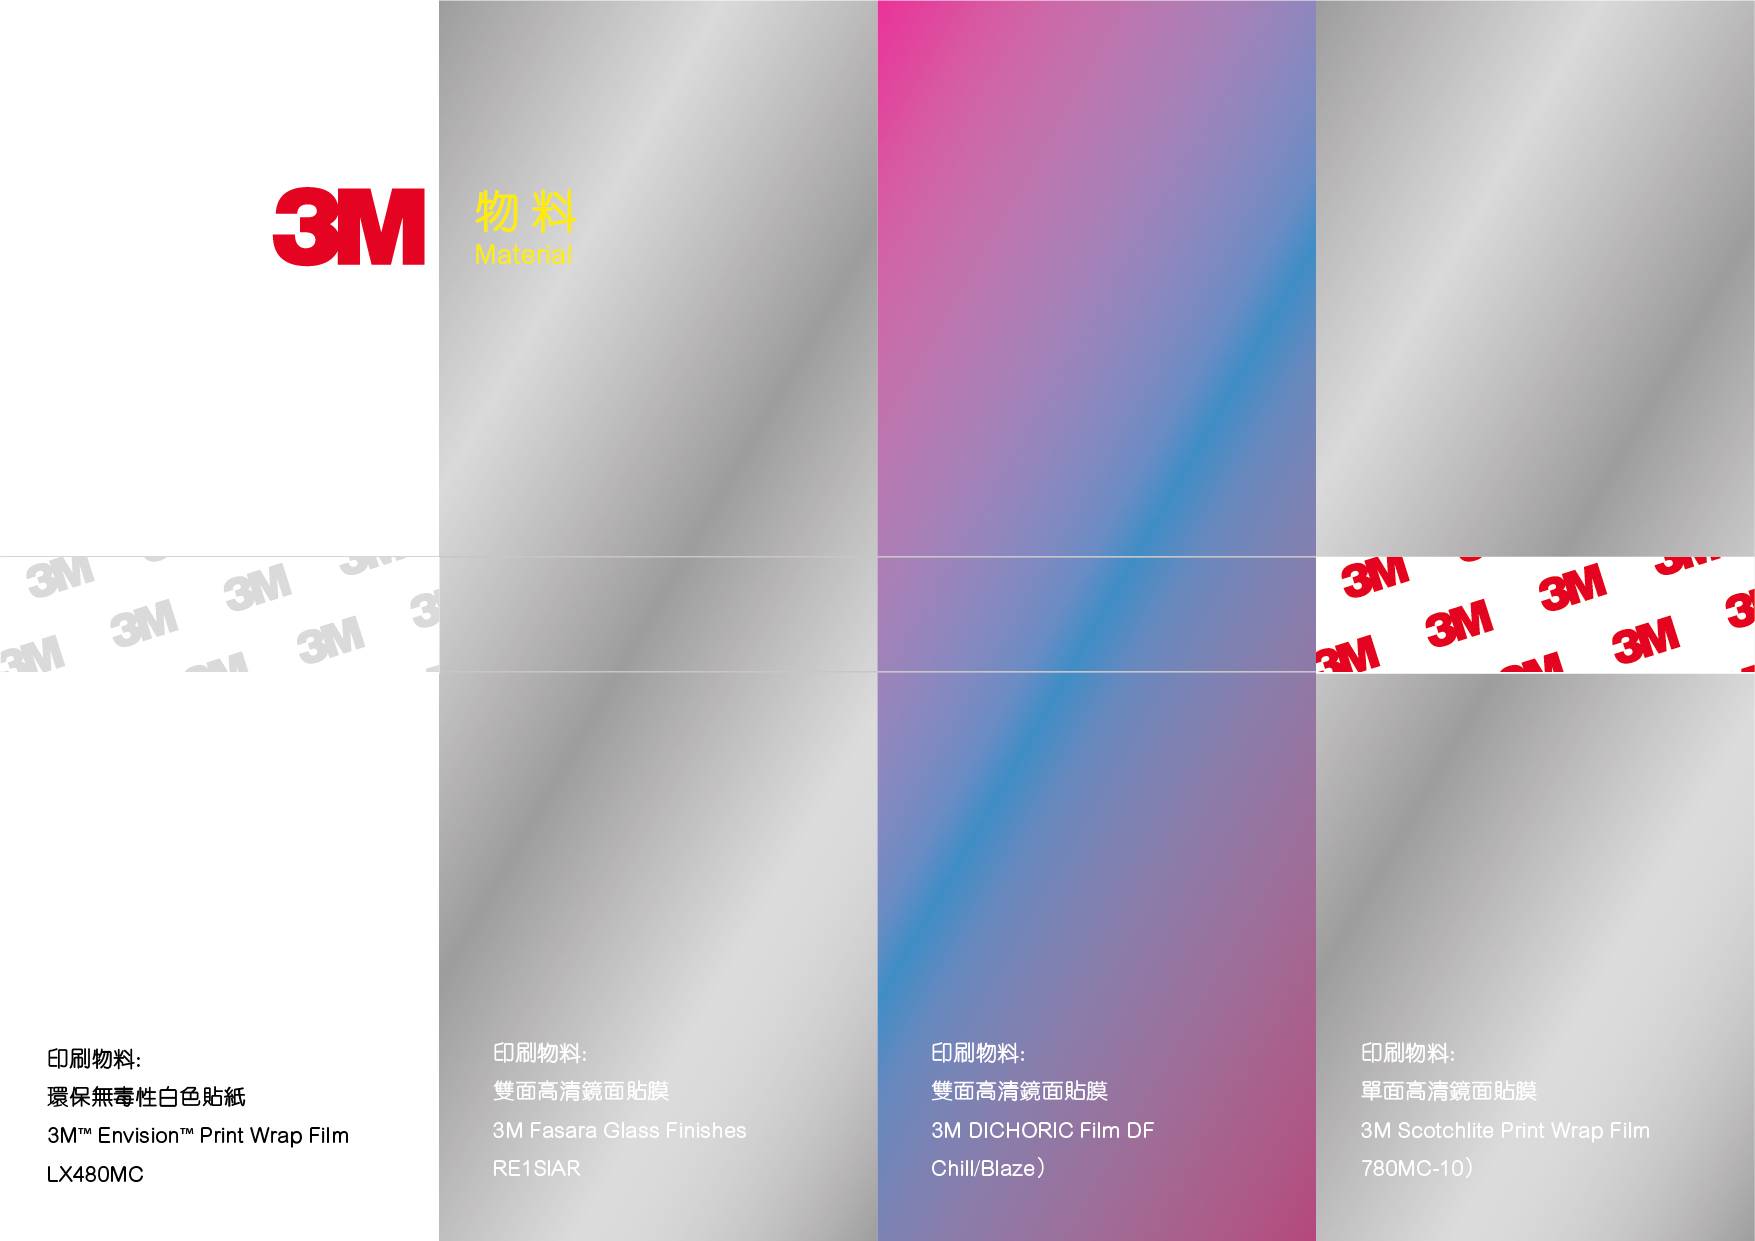 3M posters for new paper product launch